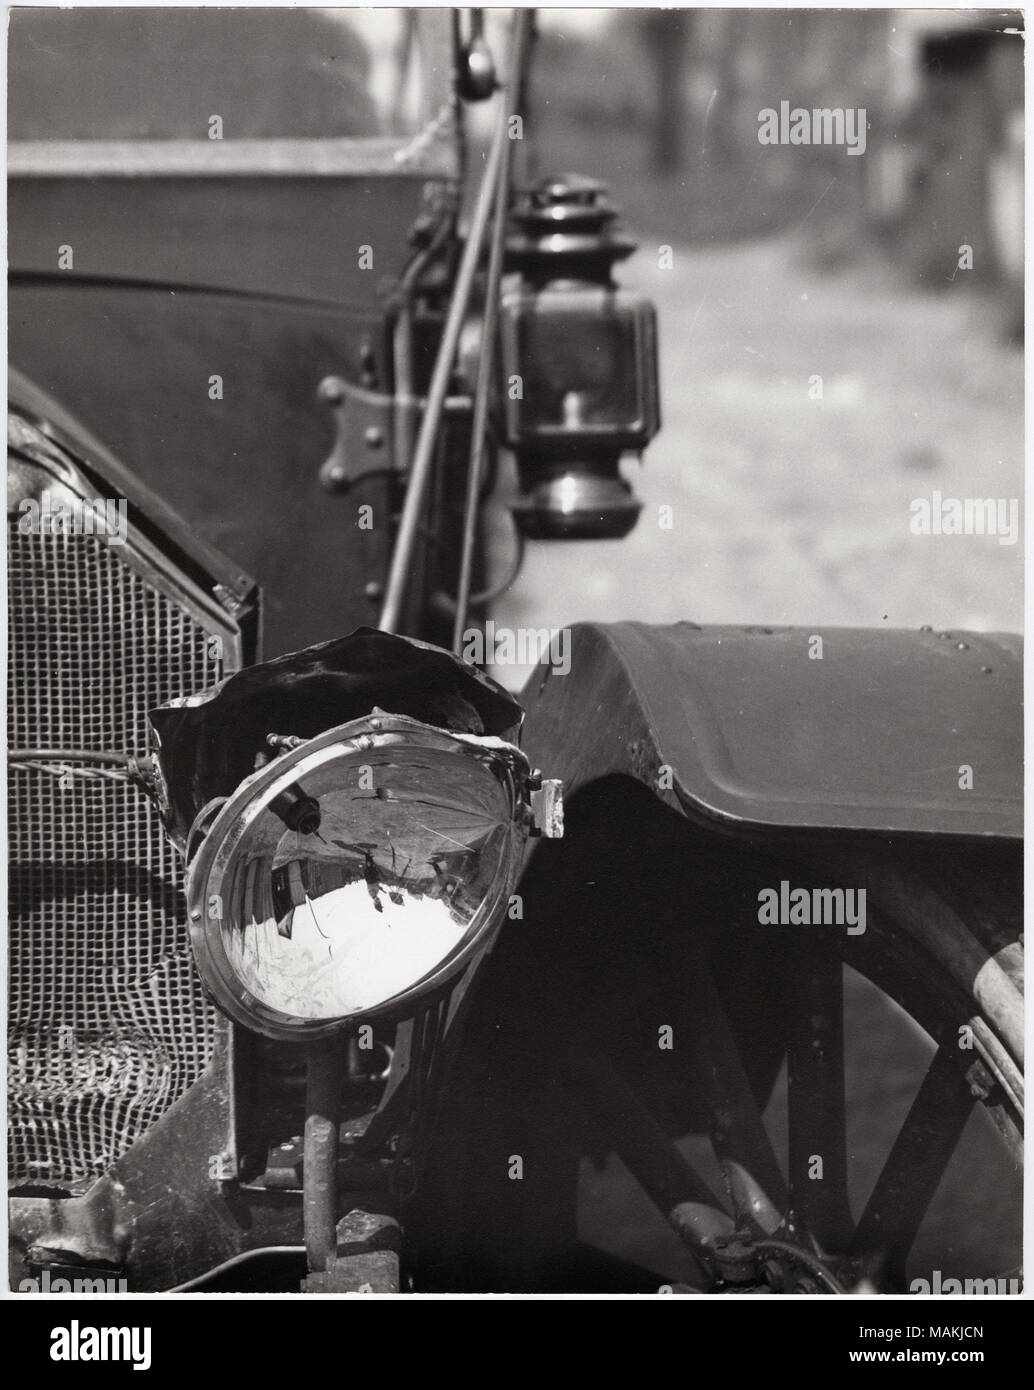 Vertical, black and white photograph showing a close-up view of a damaged automobile headlight and grille. The car's right headlight has been knocked out of place, and the grille has a dent in the lower right corner. The photographer with his camera and tripod can be seen reflected in the headlight. For the full image, see P0054-00025. Title: Close-up of a damaged automobile headlight.  . circa 1910. Holt, Charles Clement, 1866-1925 Stock Photo